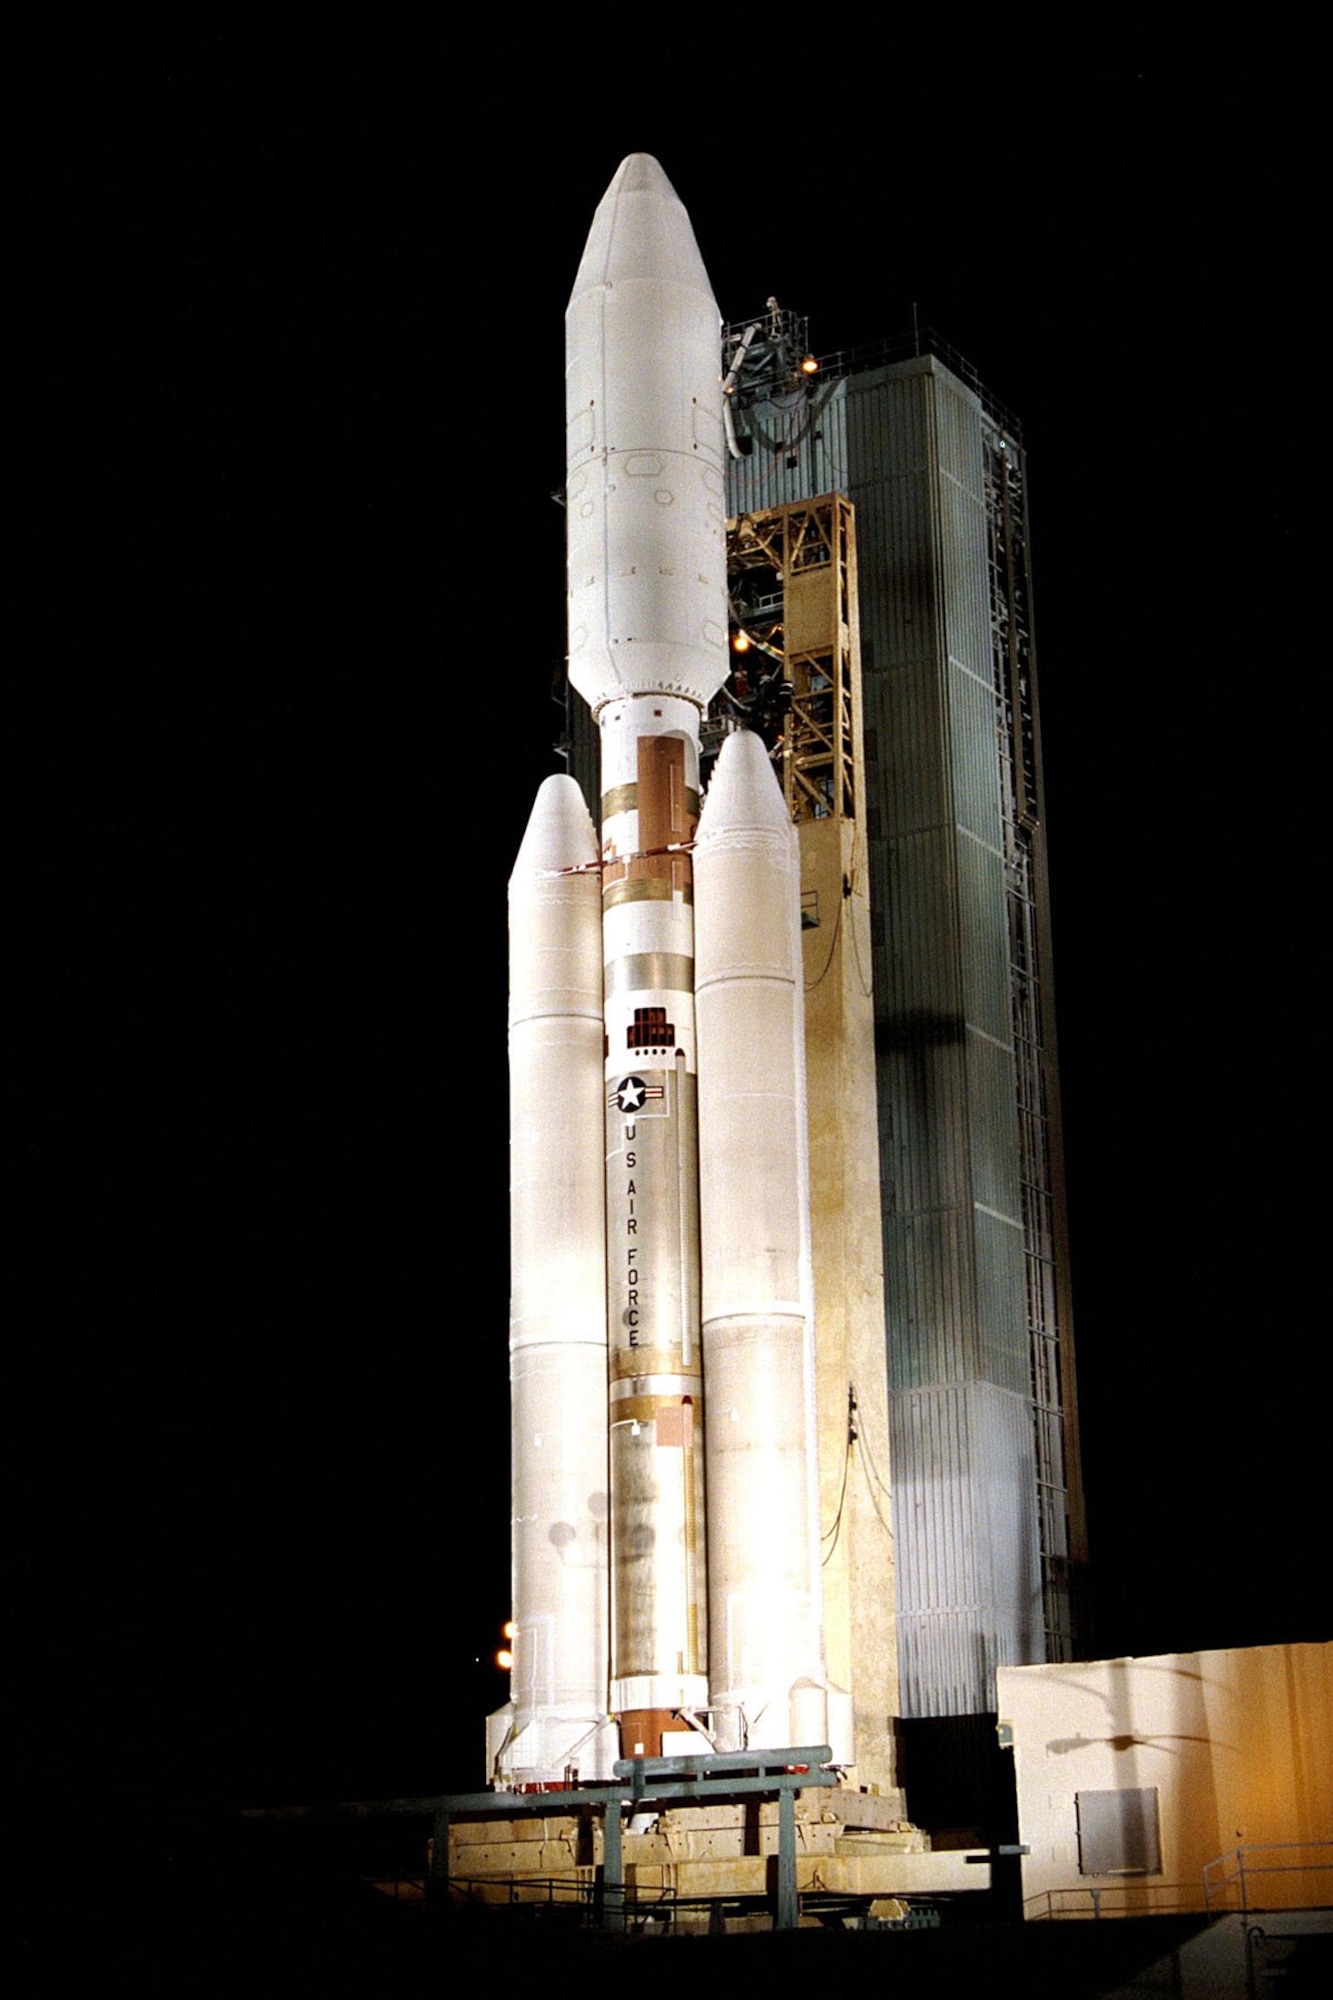 A Titan IVB at Cape Canaveral's Launch Complex 40 in 1997. This vehicle, similar to NMUSAF's but with a shorter payload fairing, carried the Cassini-Huygens probe into space to study Saturn. (U.S. Air Force photo)